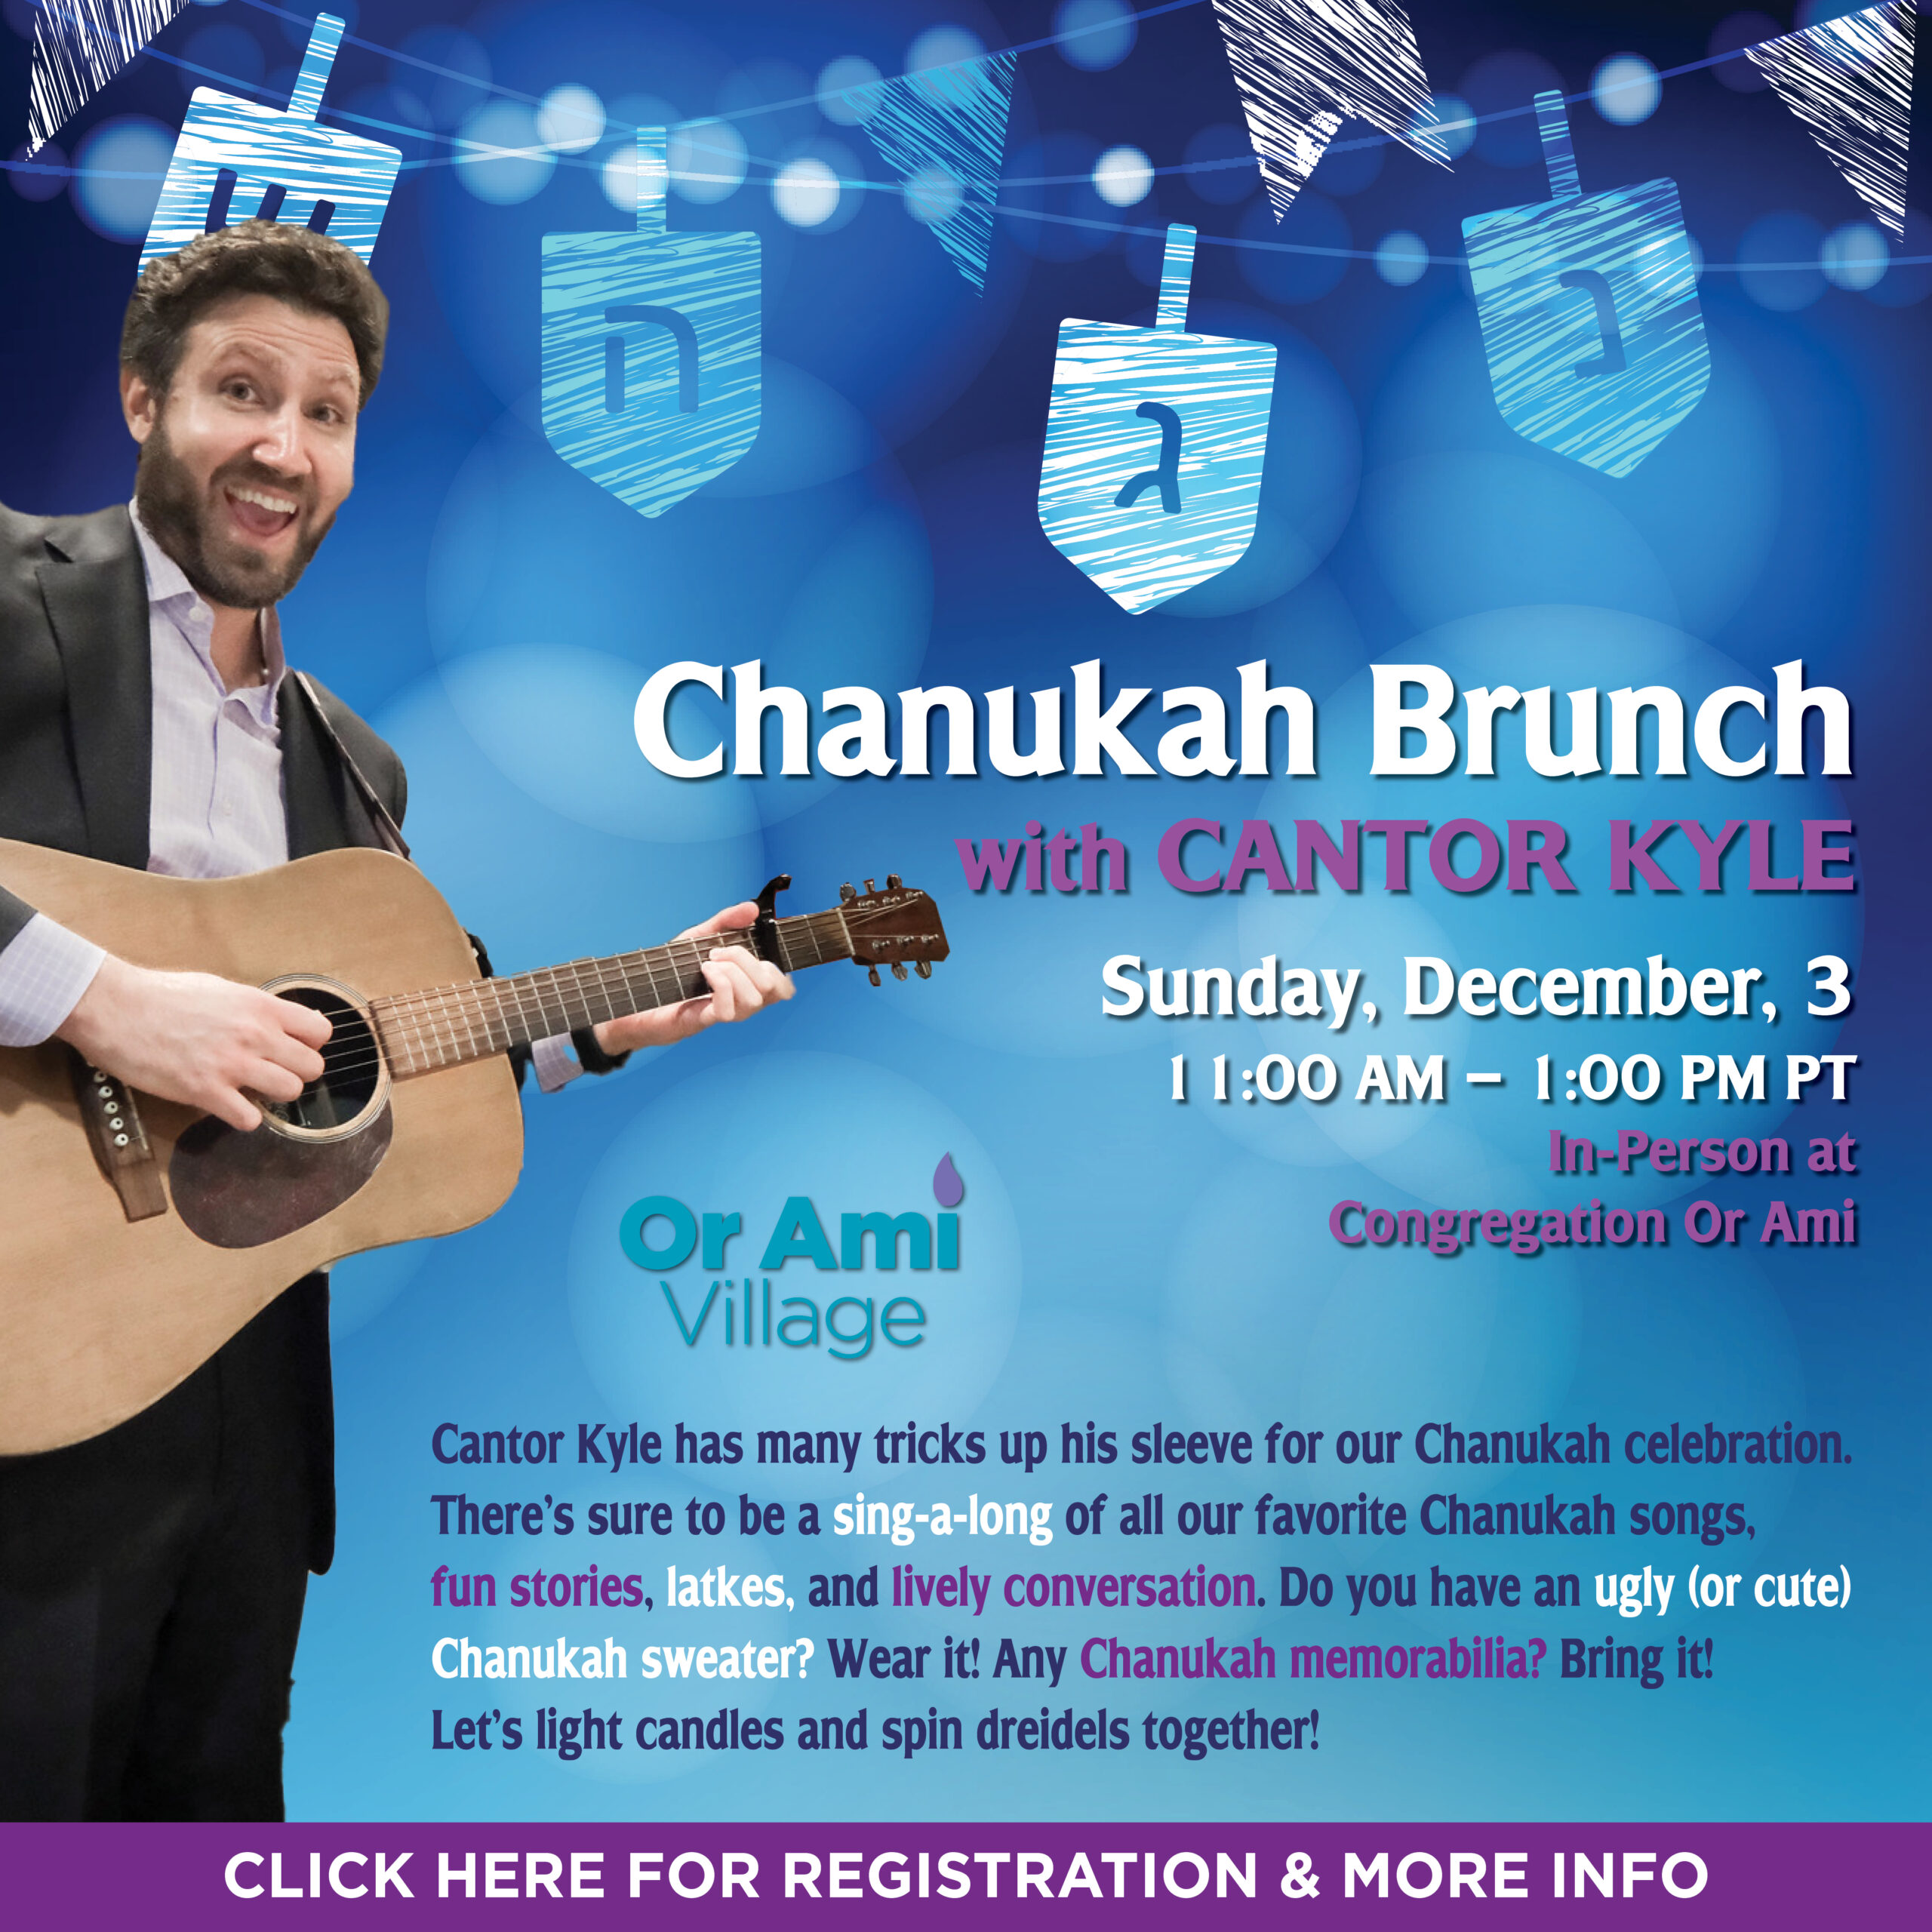 Or Ami Village Chanukah Party with Cantor Kyle CLICK